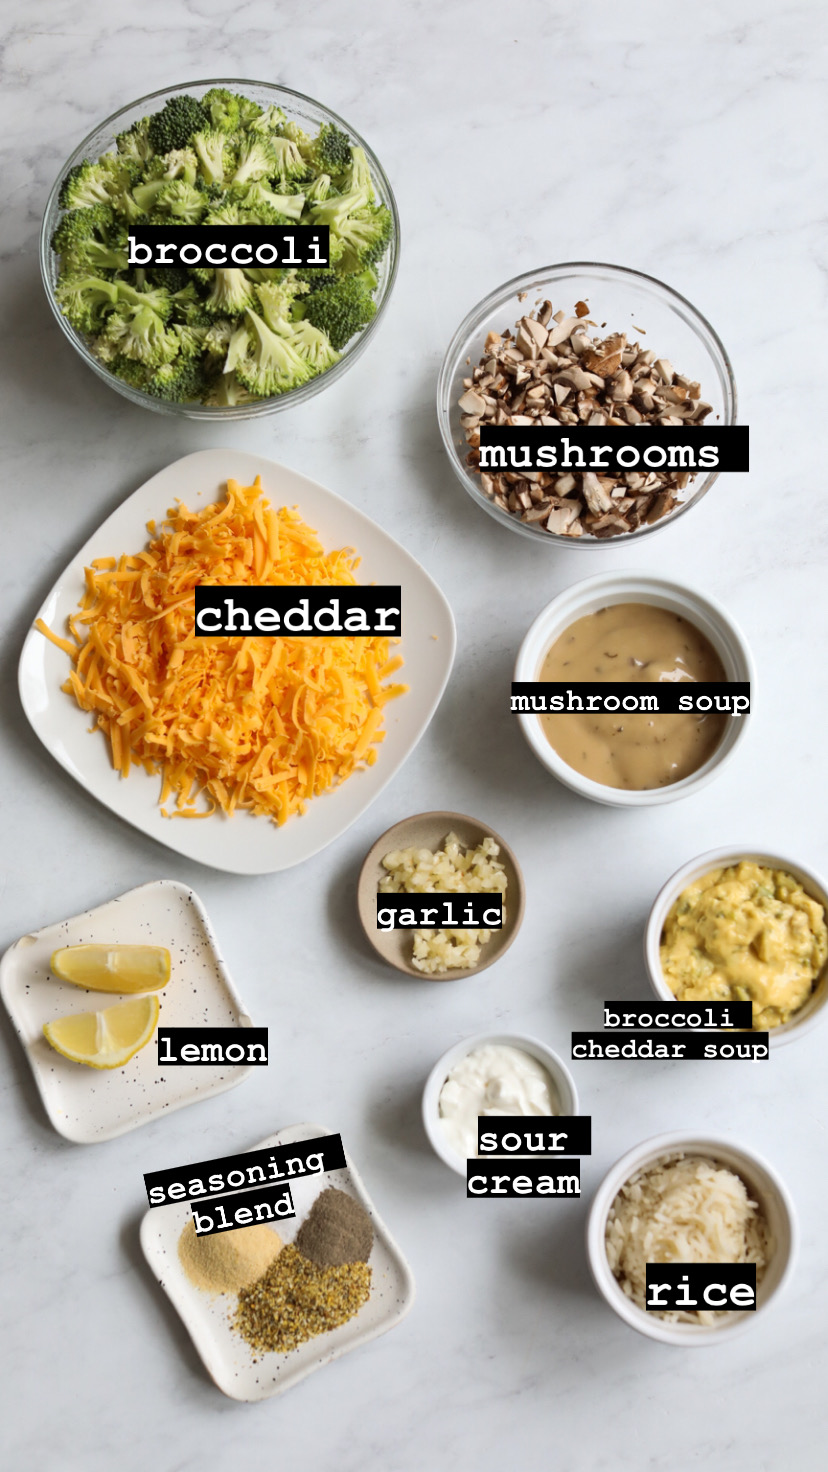 Flat lay ingredients for broccoli cheese casserole.